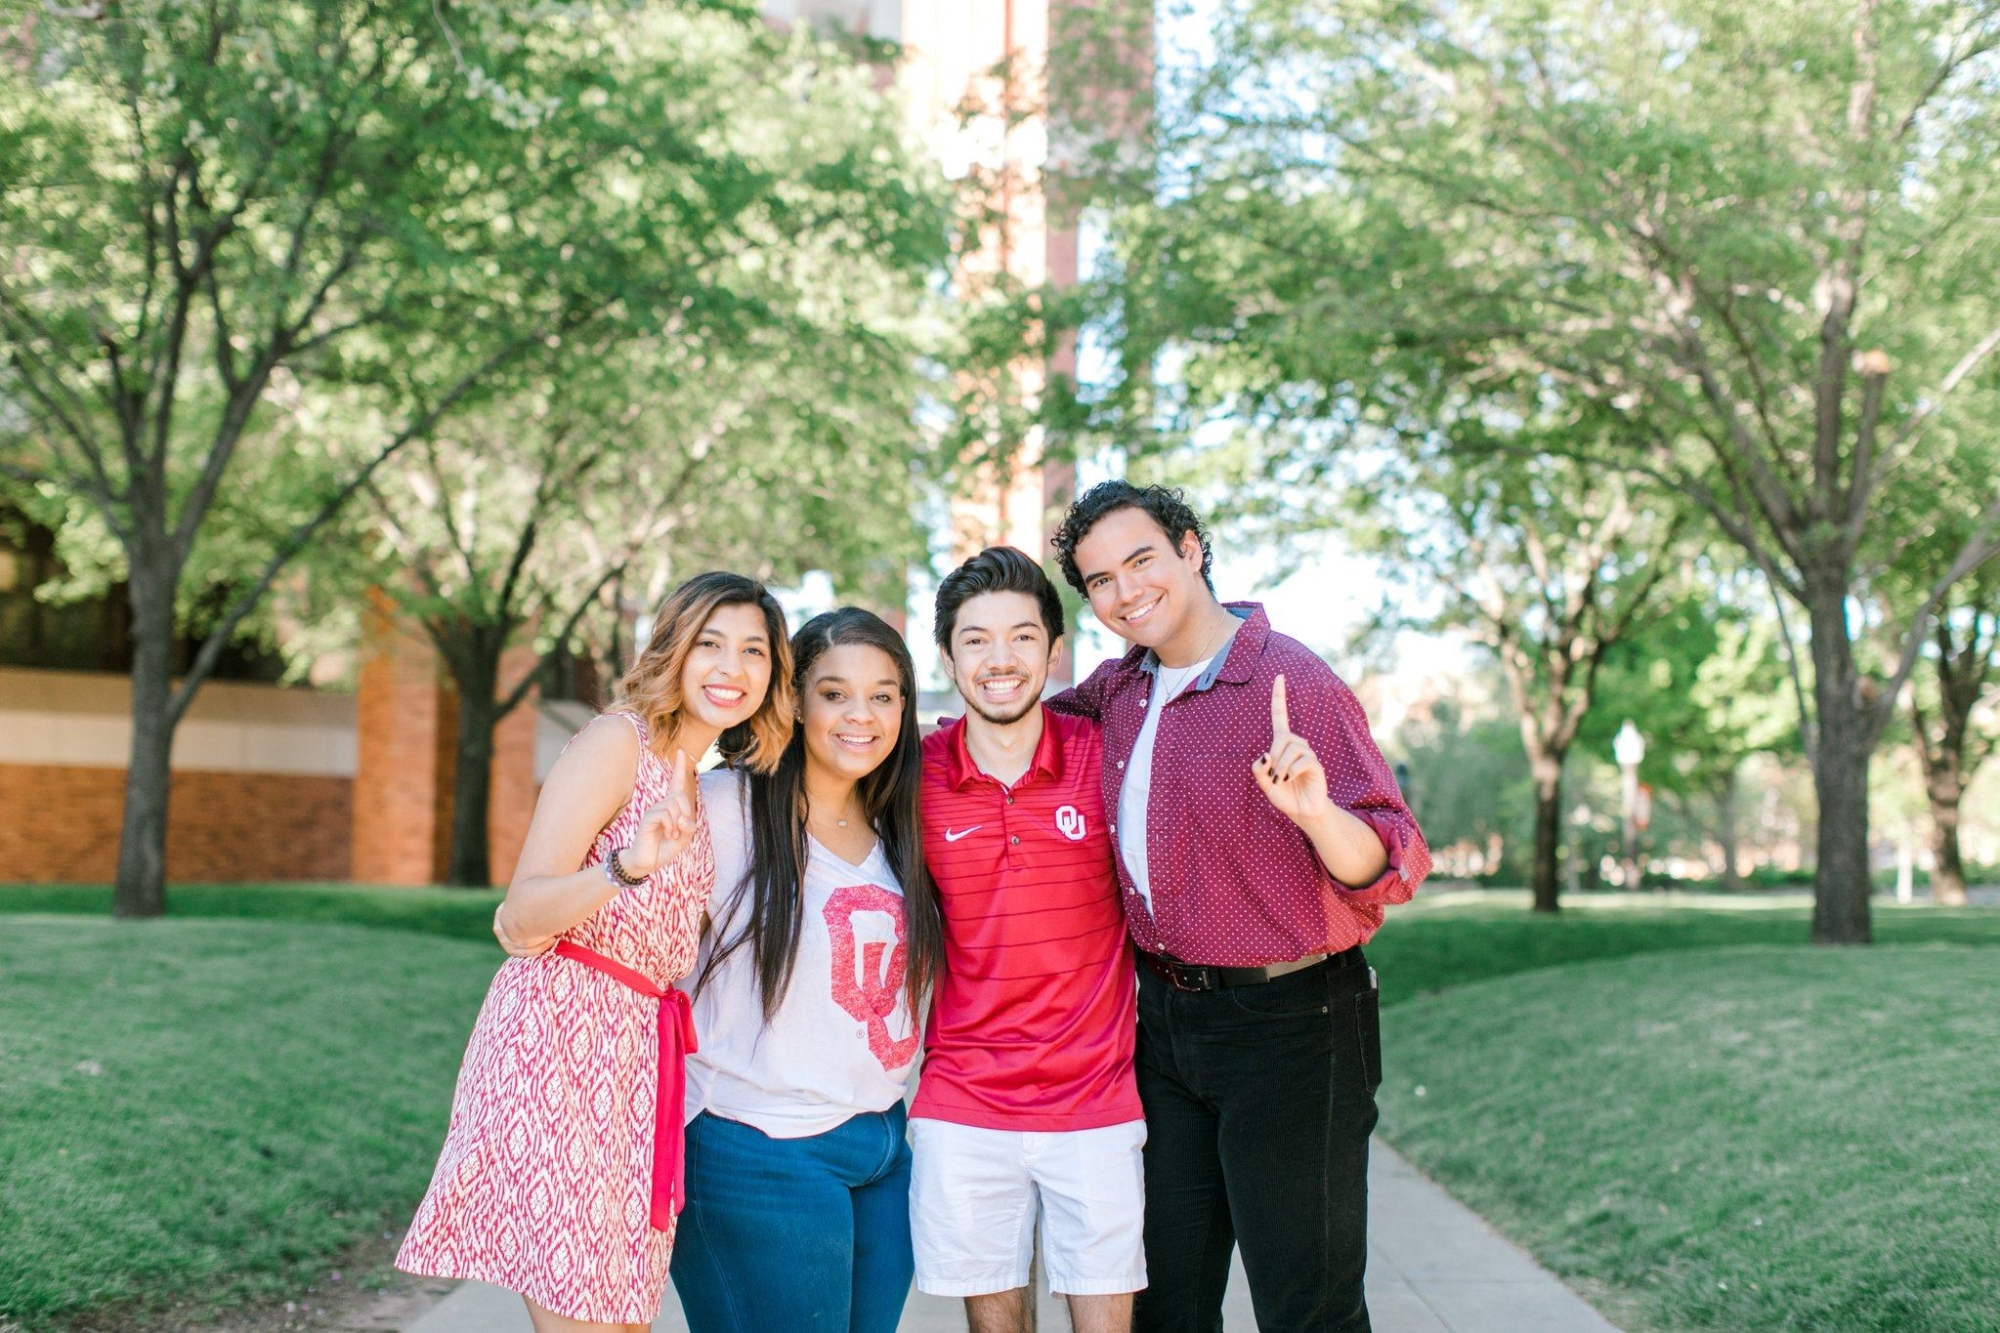 Students on the University of Oklahoma campus